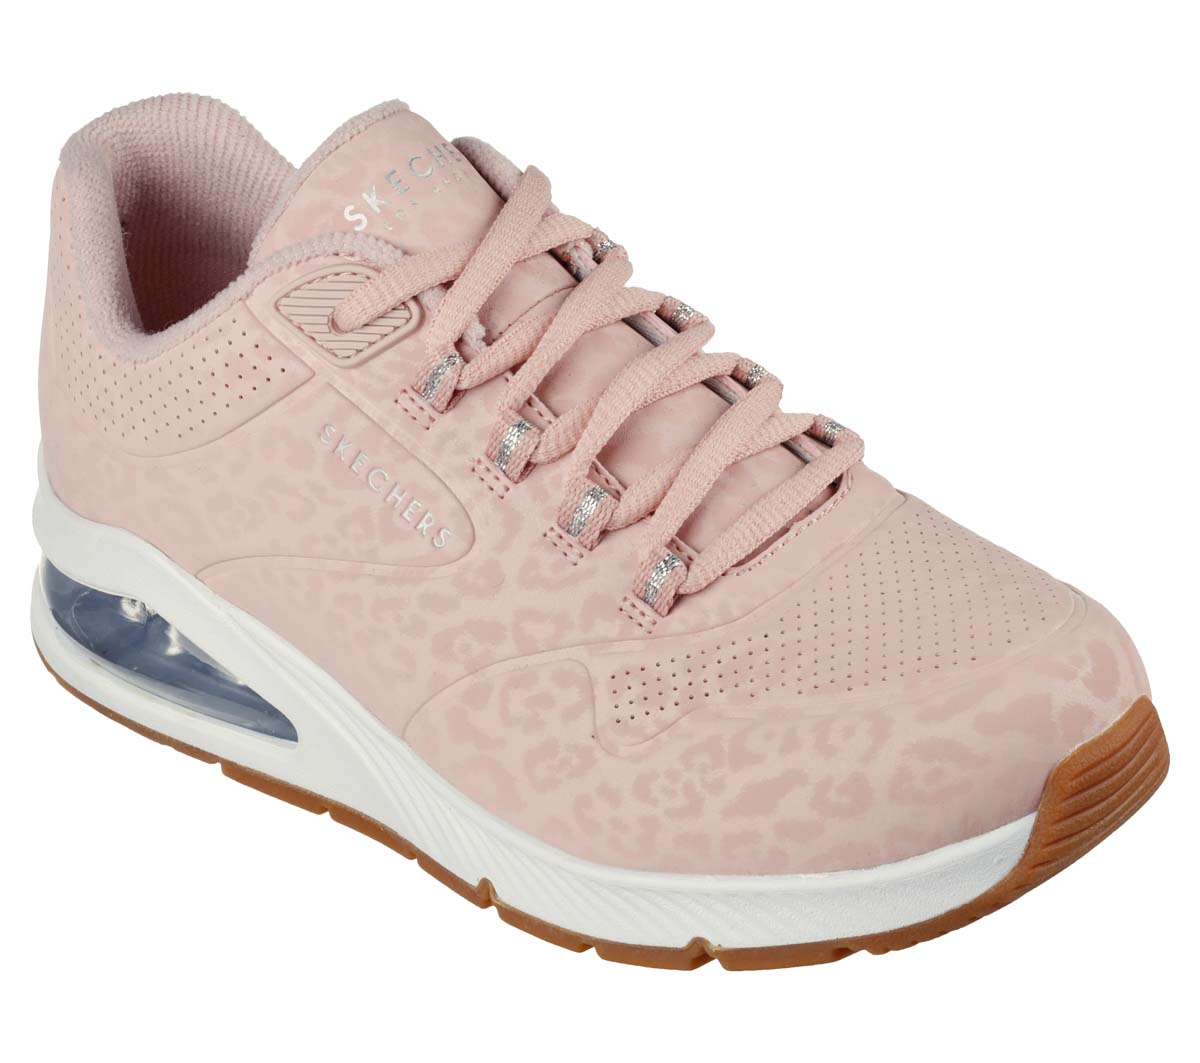 Skechers Uno 2 Leopard BLSH Blush Pink Womens trainers 155642 in a Plain Man-made in Size 7